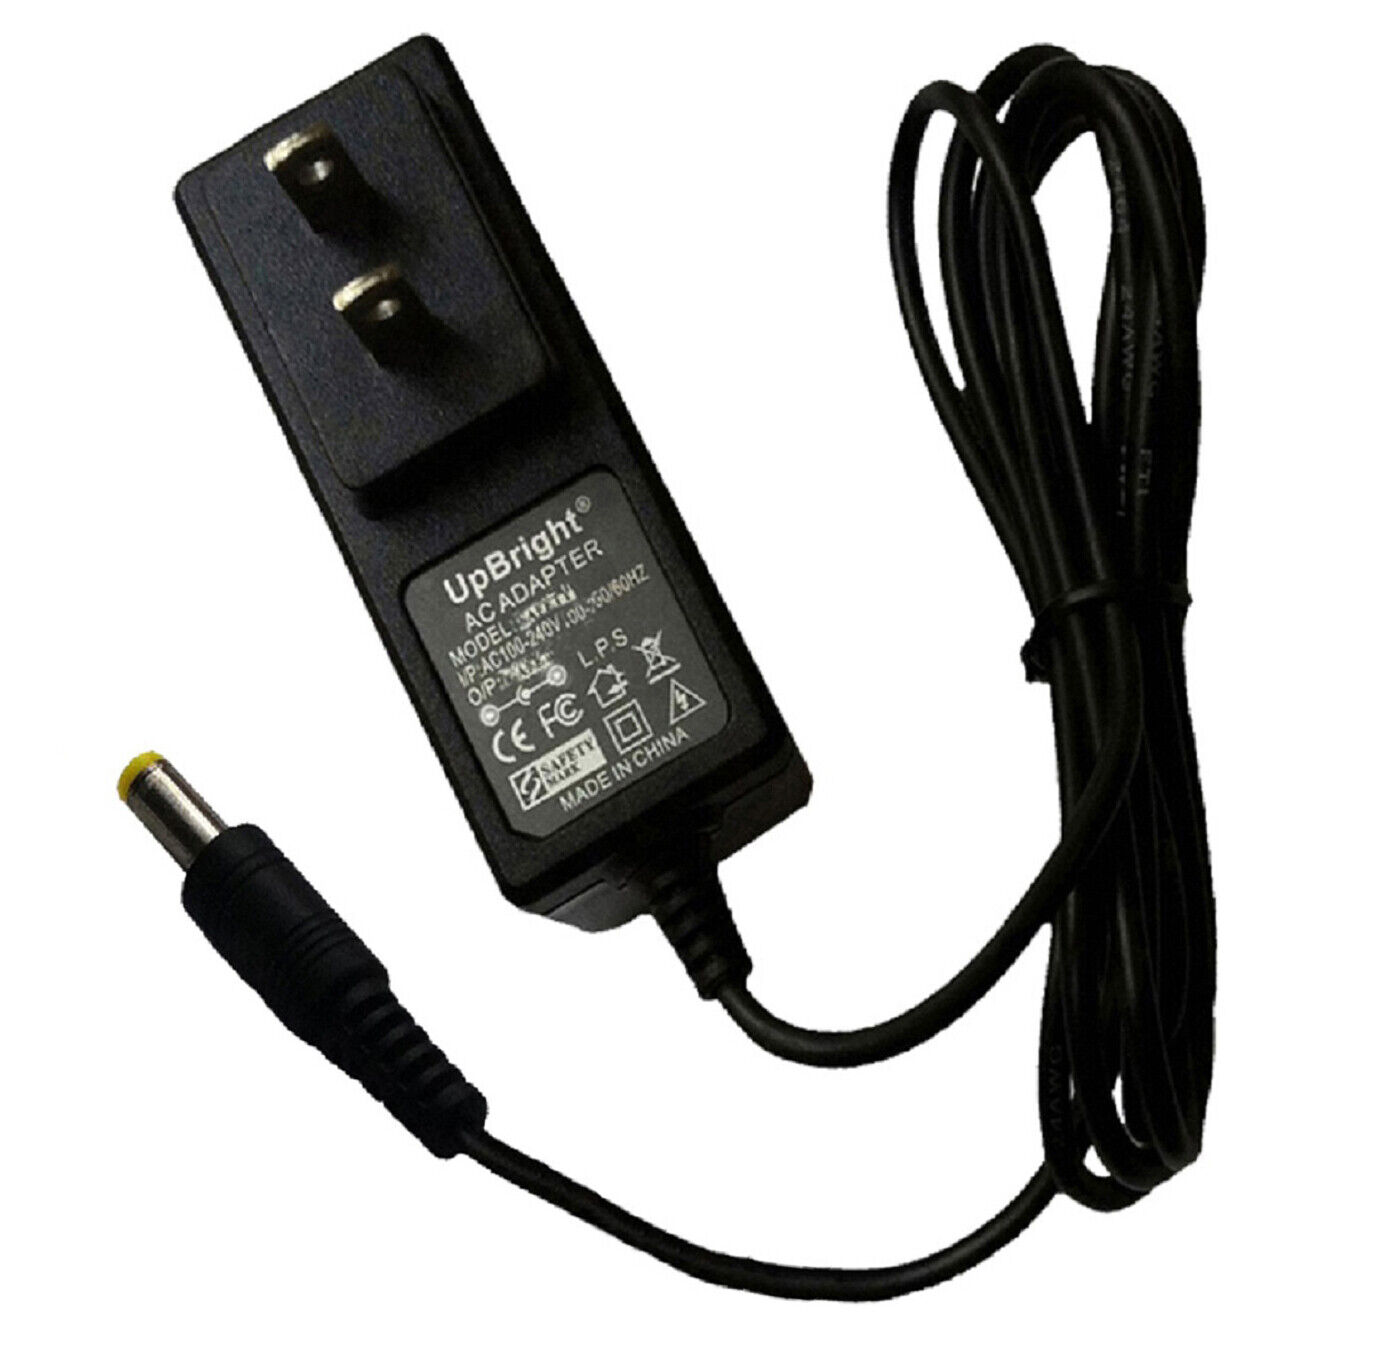 AC Adapter For Sony Discman Portable CD Walkman G-Protection Player Power Supply